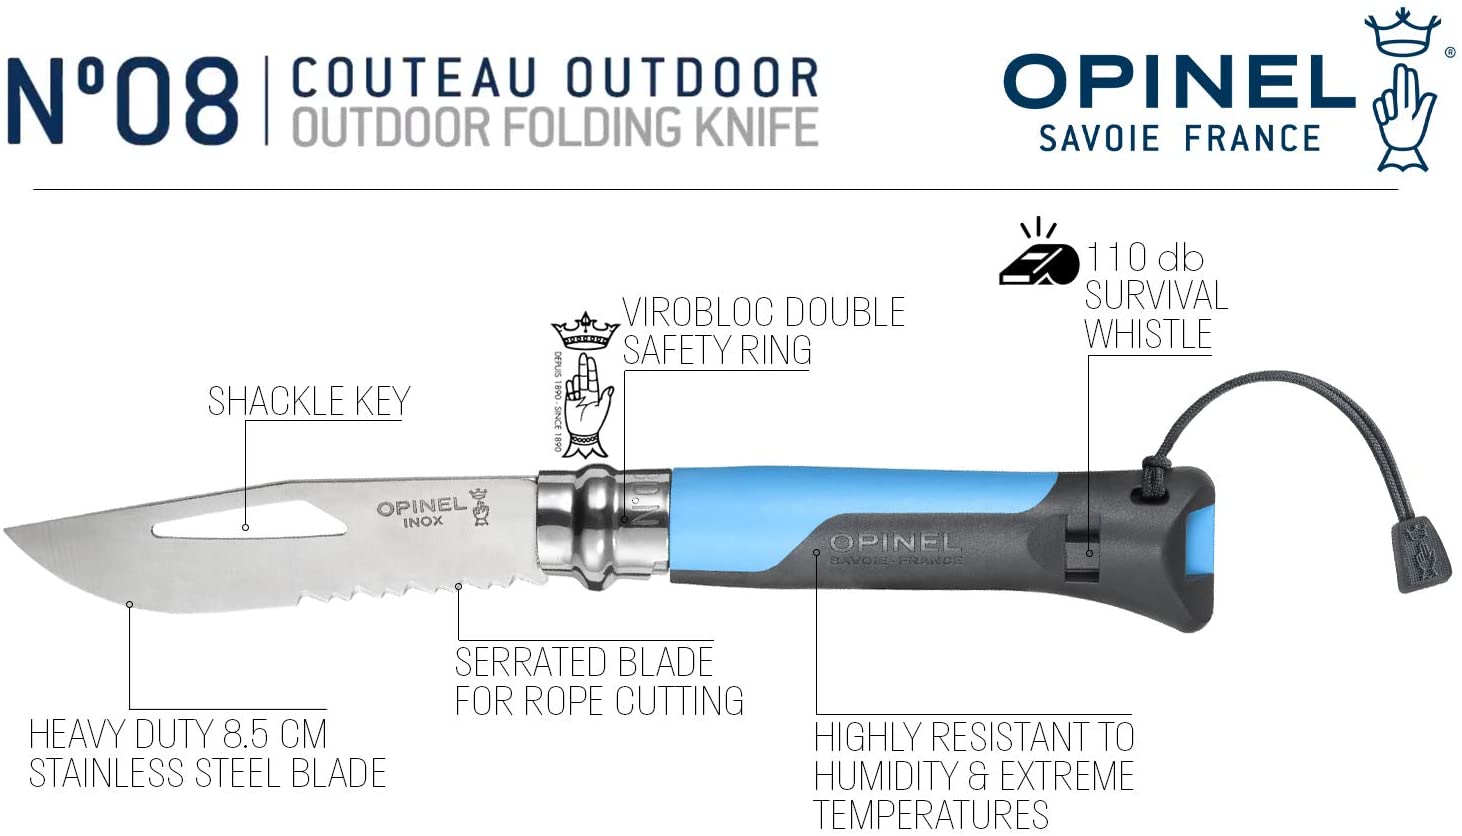 Opinel No.8 Outdoor  Goudy's French Cuisine